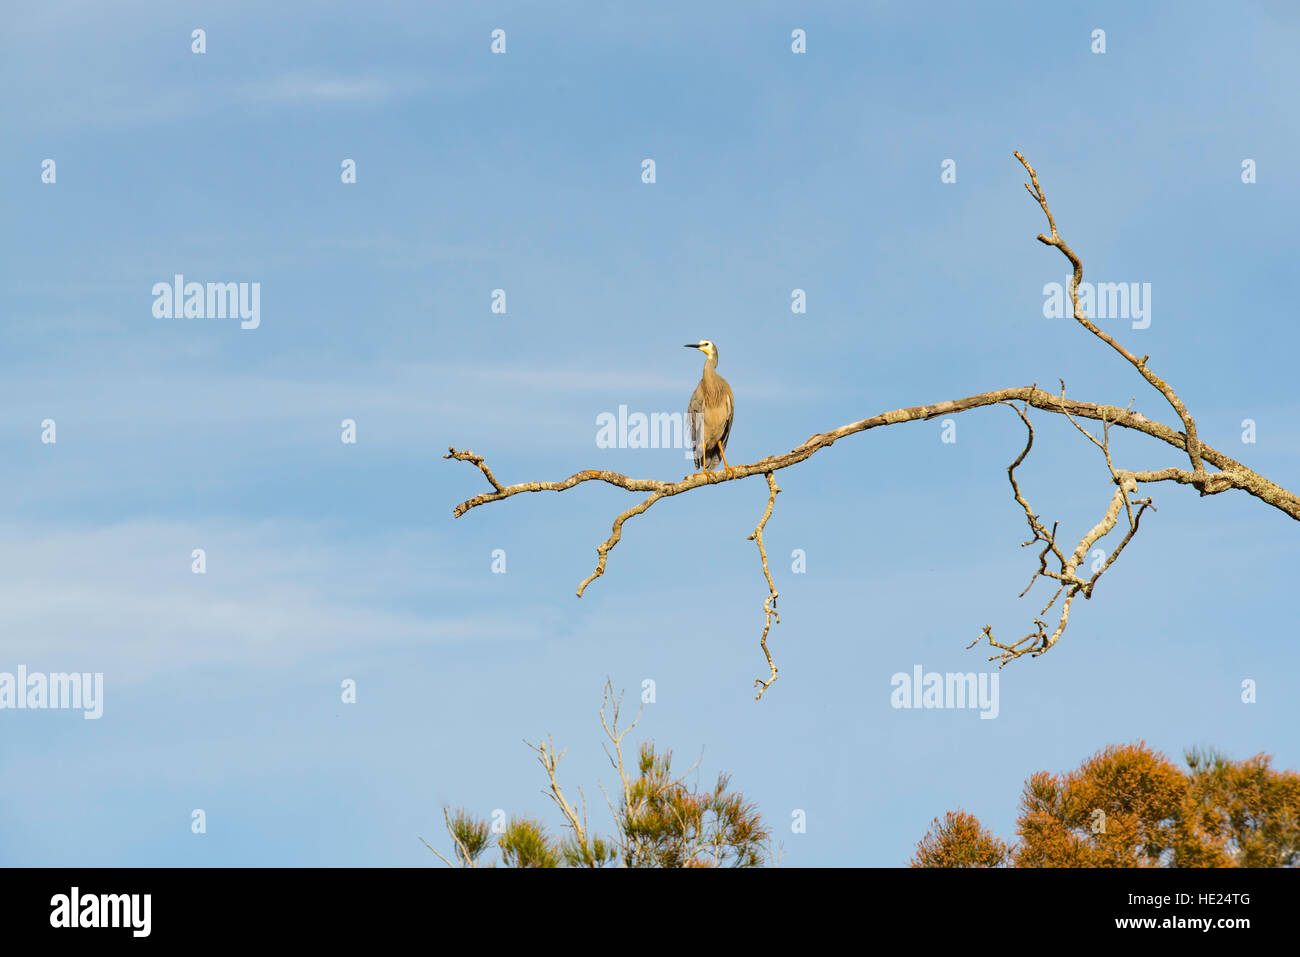 White-faced Heron (Egretta novaehollandiae) or White Fronted Heron sits on the branch of a dead tree in a rural coastal environment Stock Photo